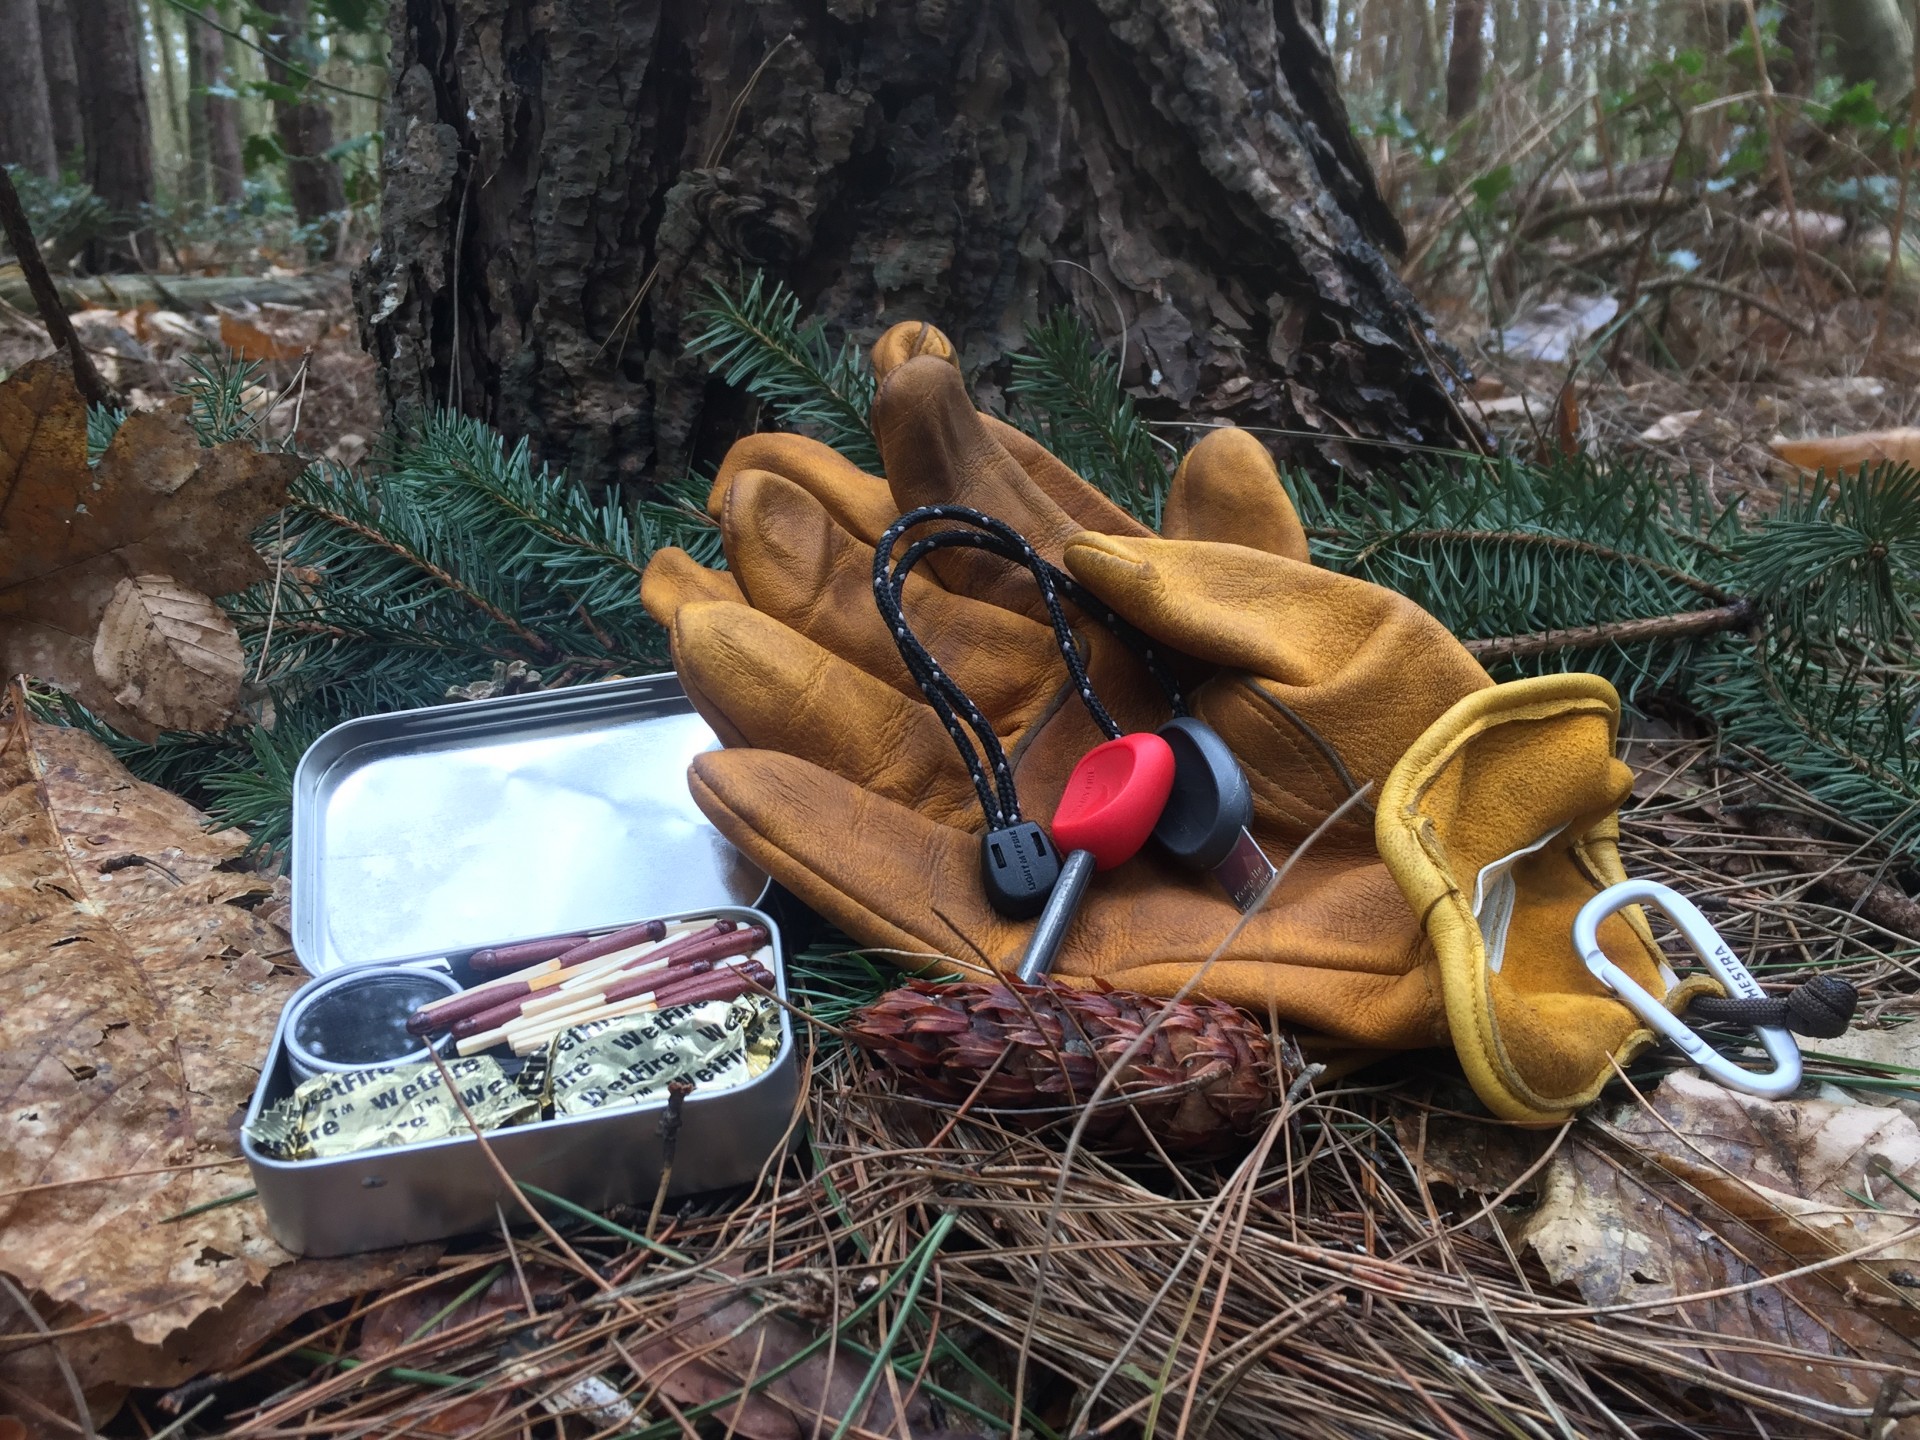 Fire starting kit for our wild camps.